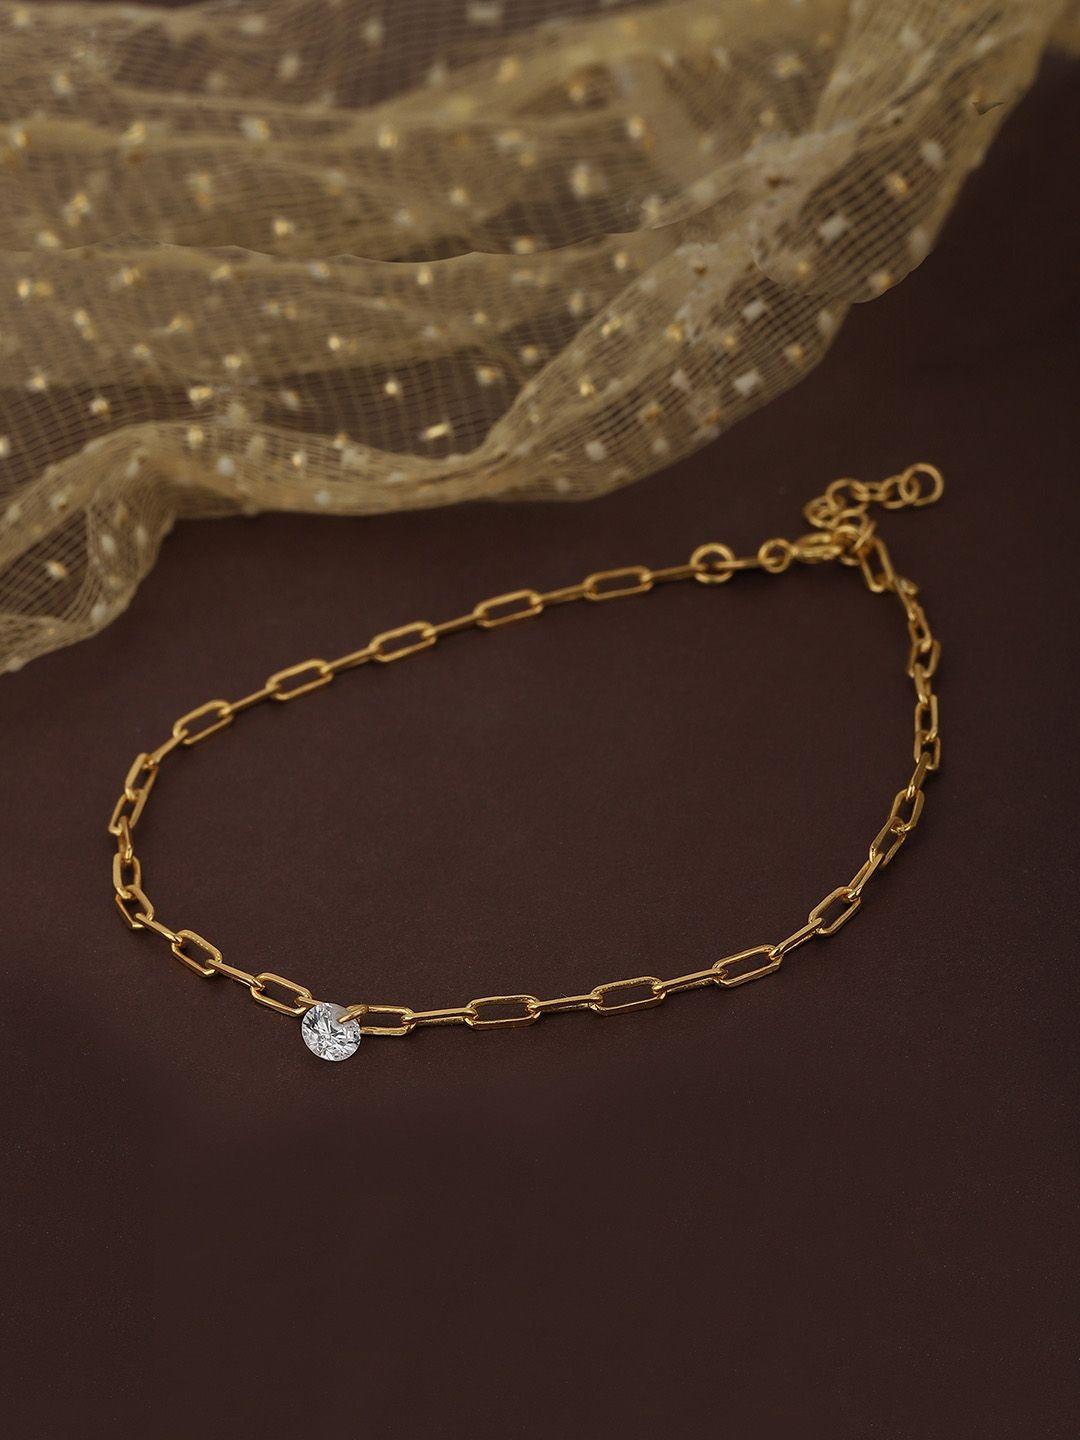 carlton london gold-plated handcrafted anklet